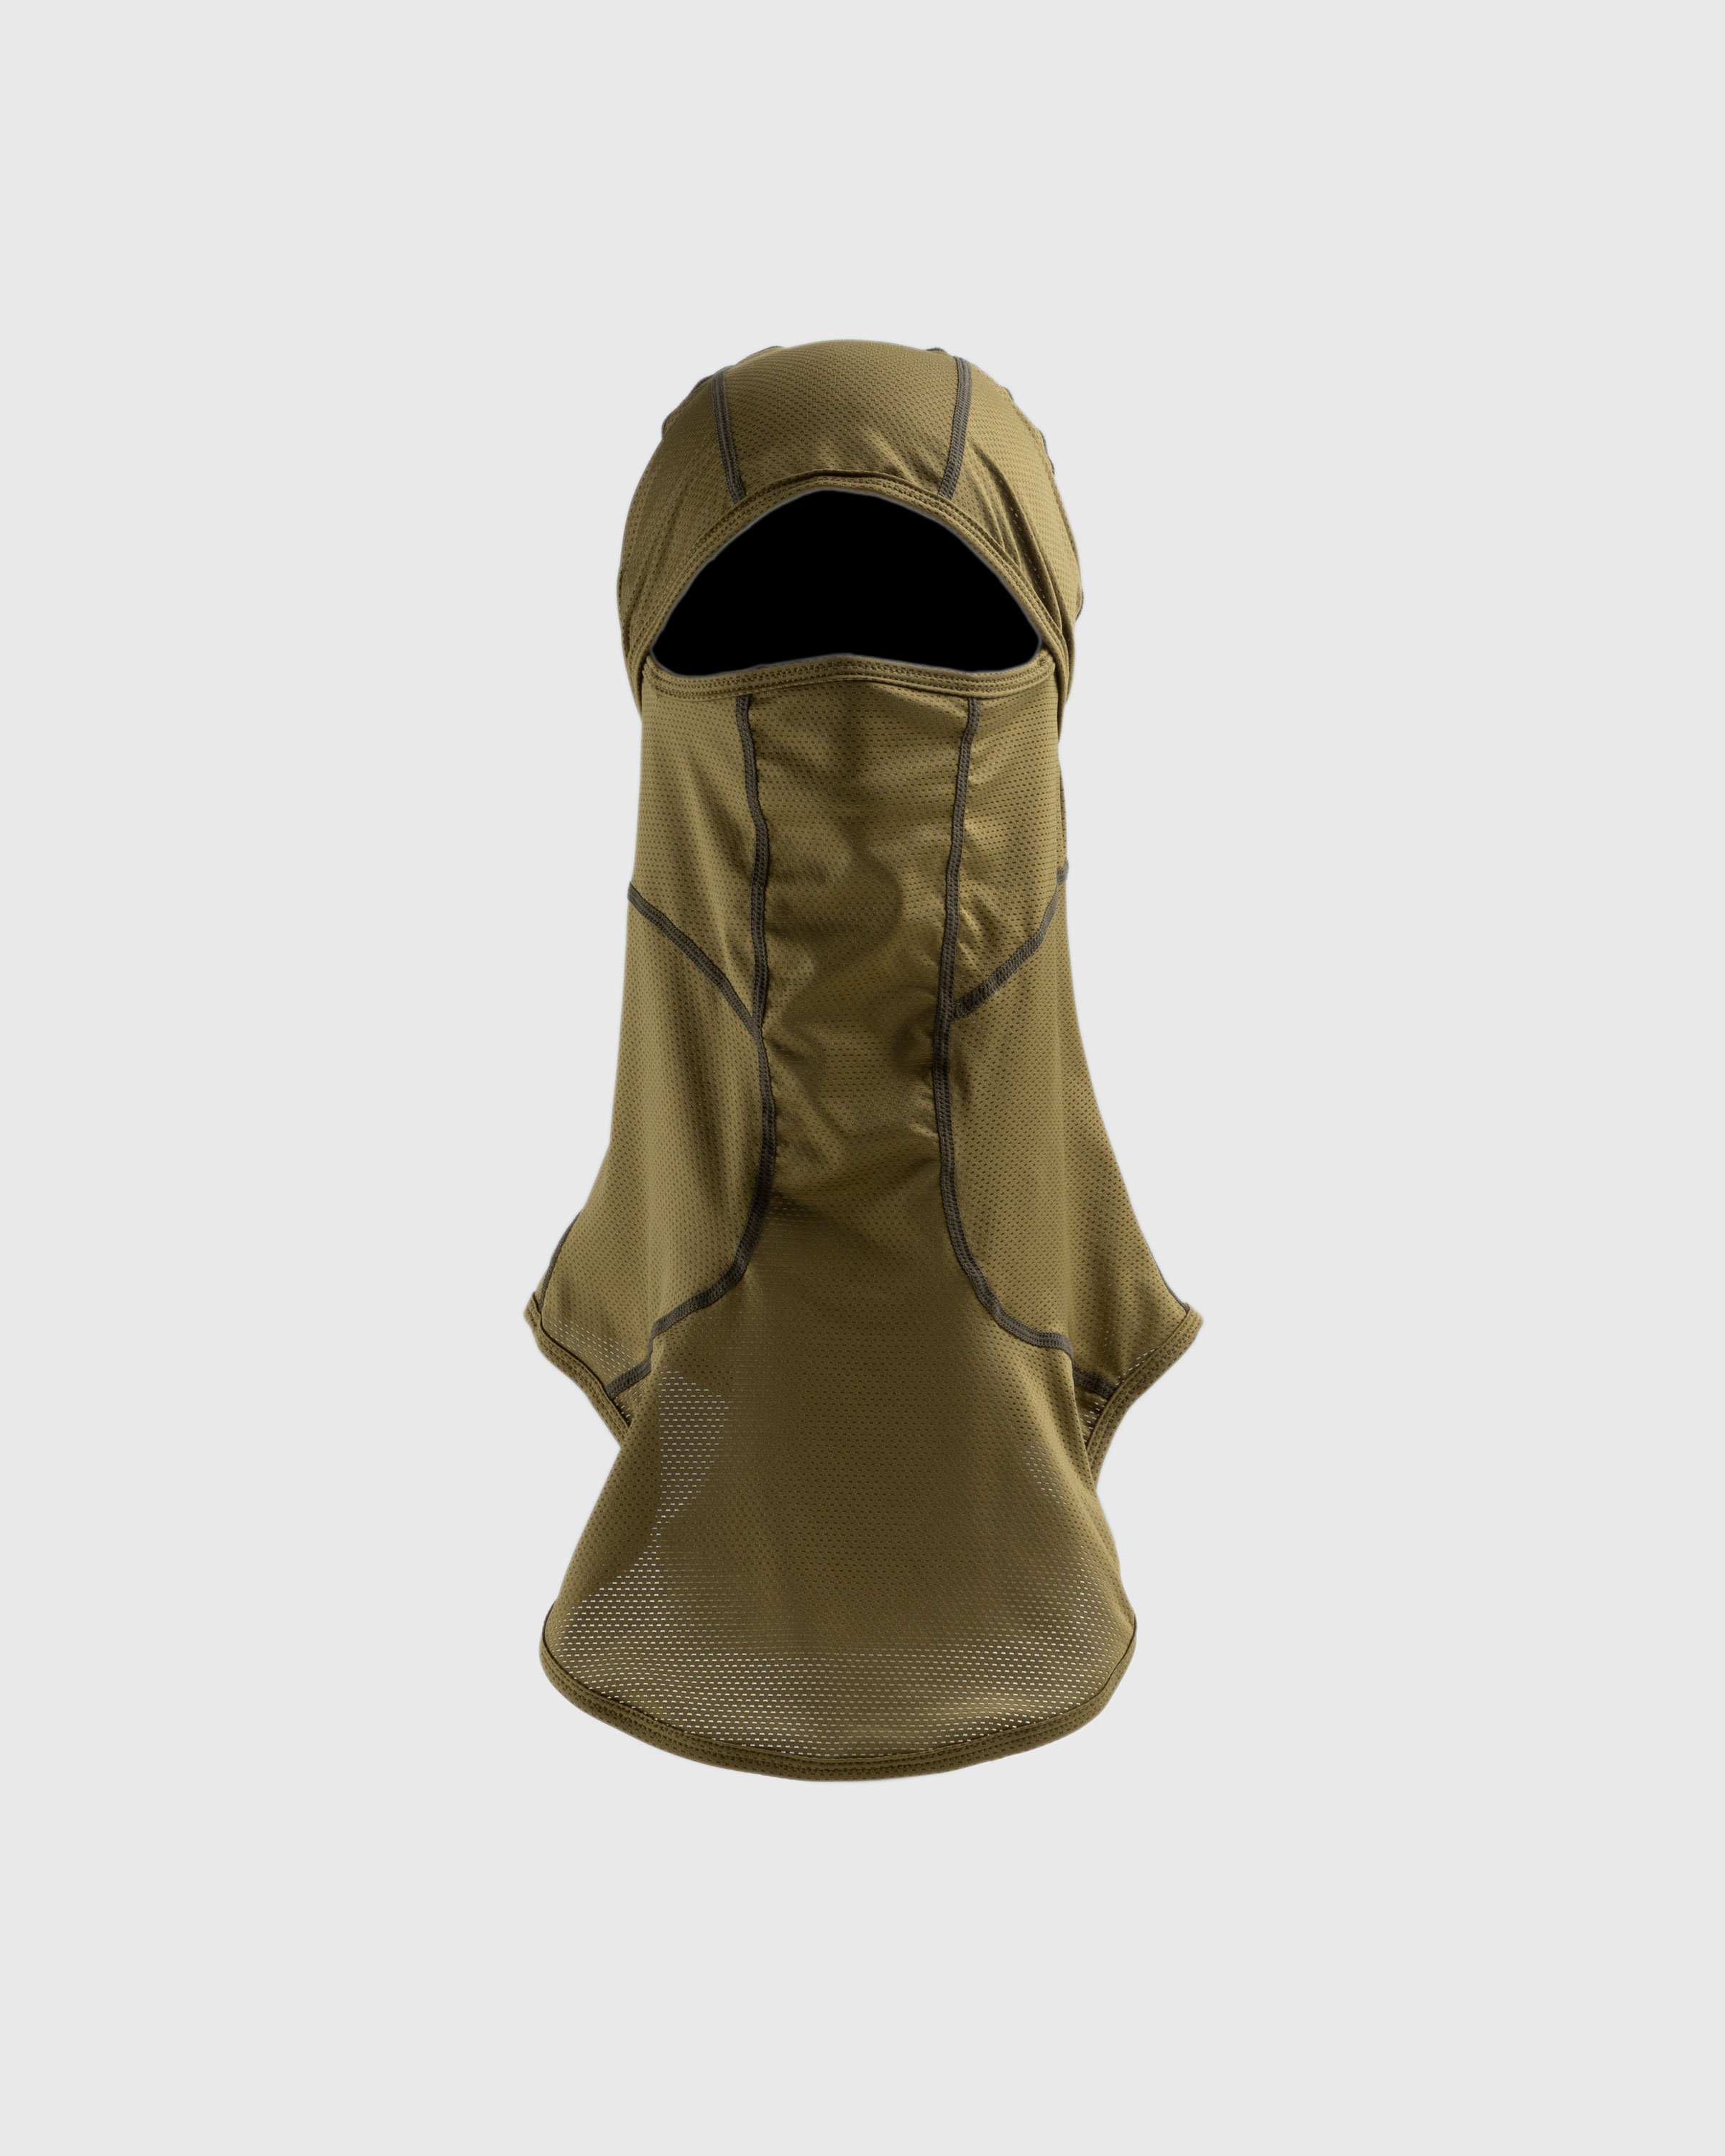 Post Archive Faction (PAF) - 5.0 Balaclava Right Olive Green - Accessories - Green - Image 1